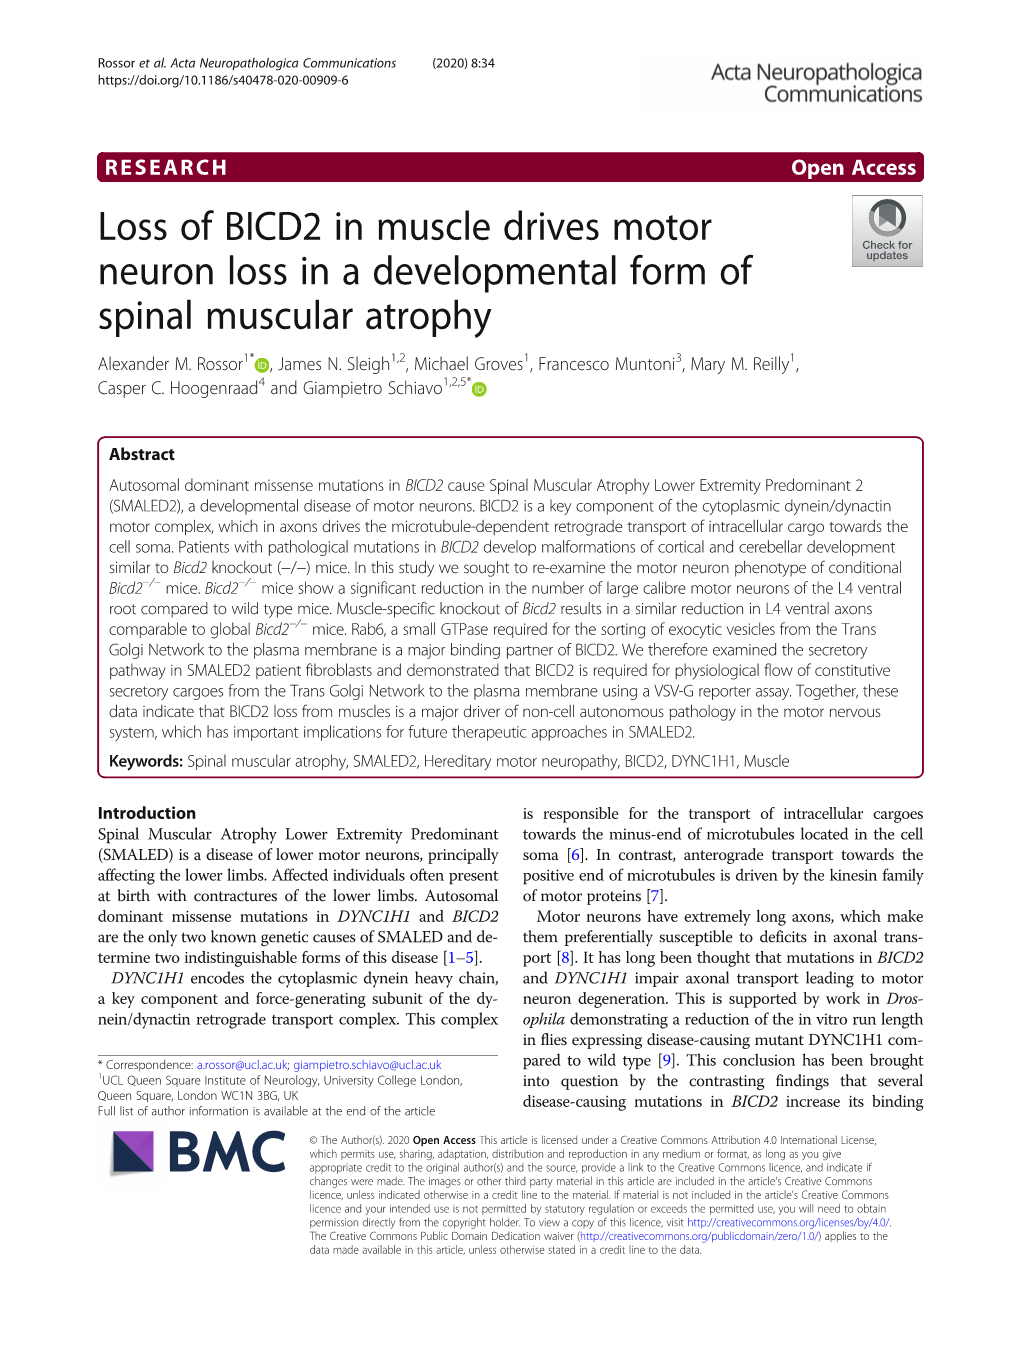 Loss of BICD2 in Muscle Drives Motor Neuron Loss in a Developmental Form of Spinal Muscular Atrophy Alexander M